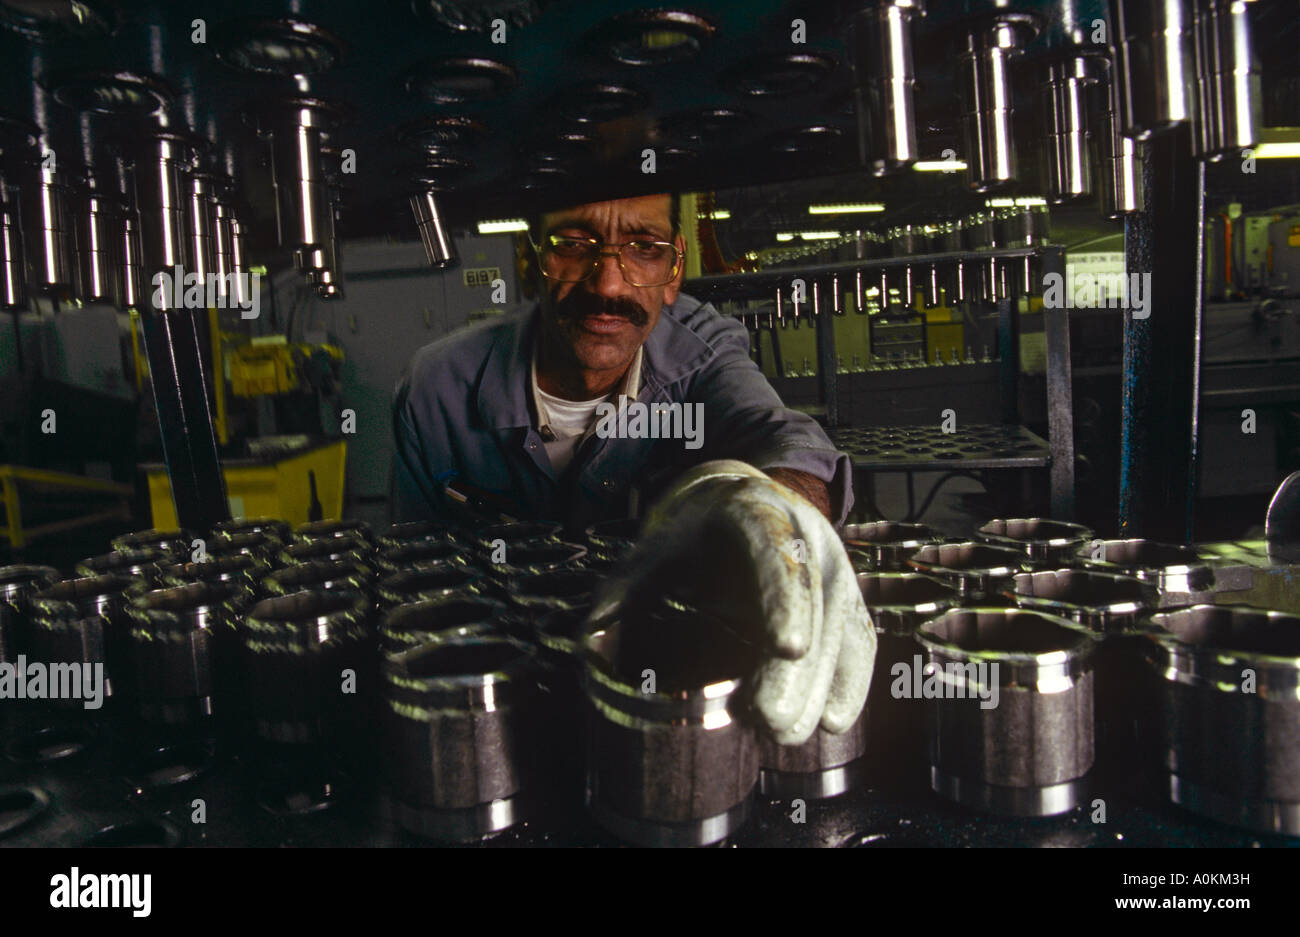 A worker sorts car parts at a GKN factory in England Stock Photo